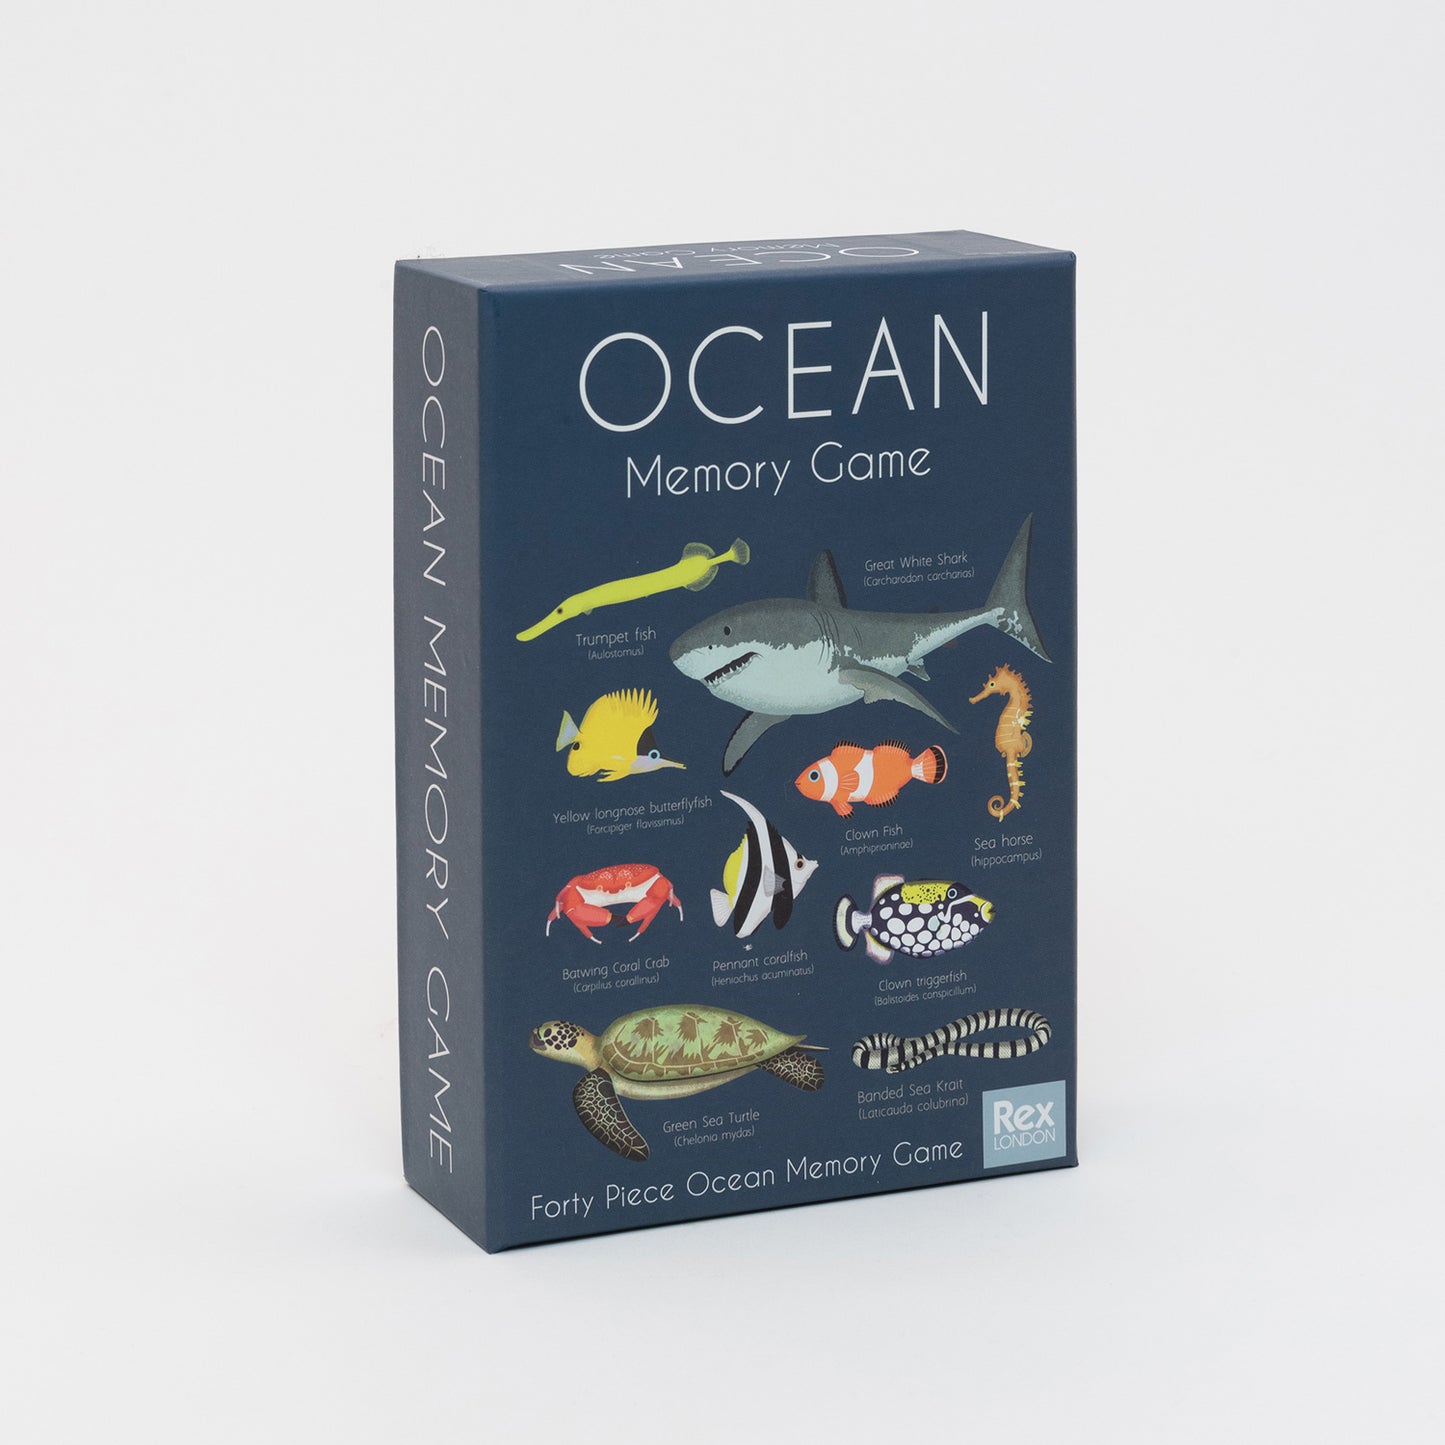 A picture of the Ocean Memory Game box on a white background.